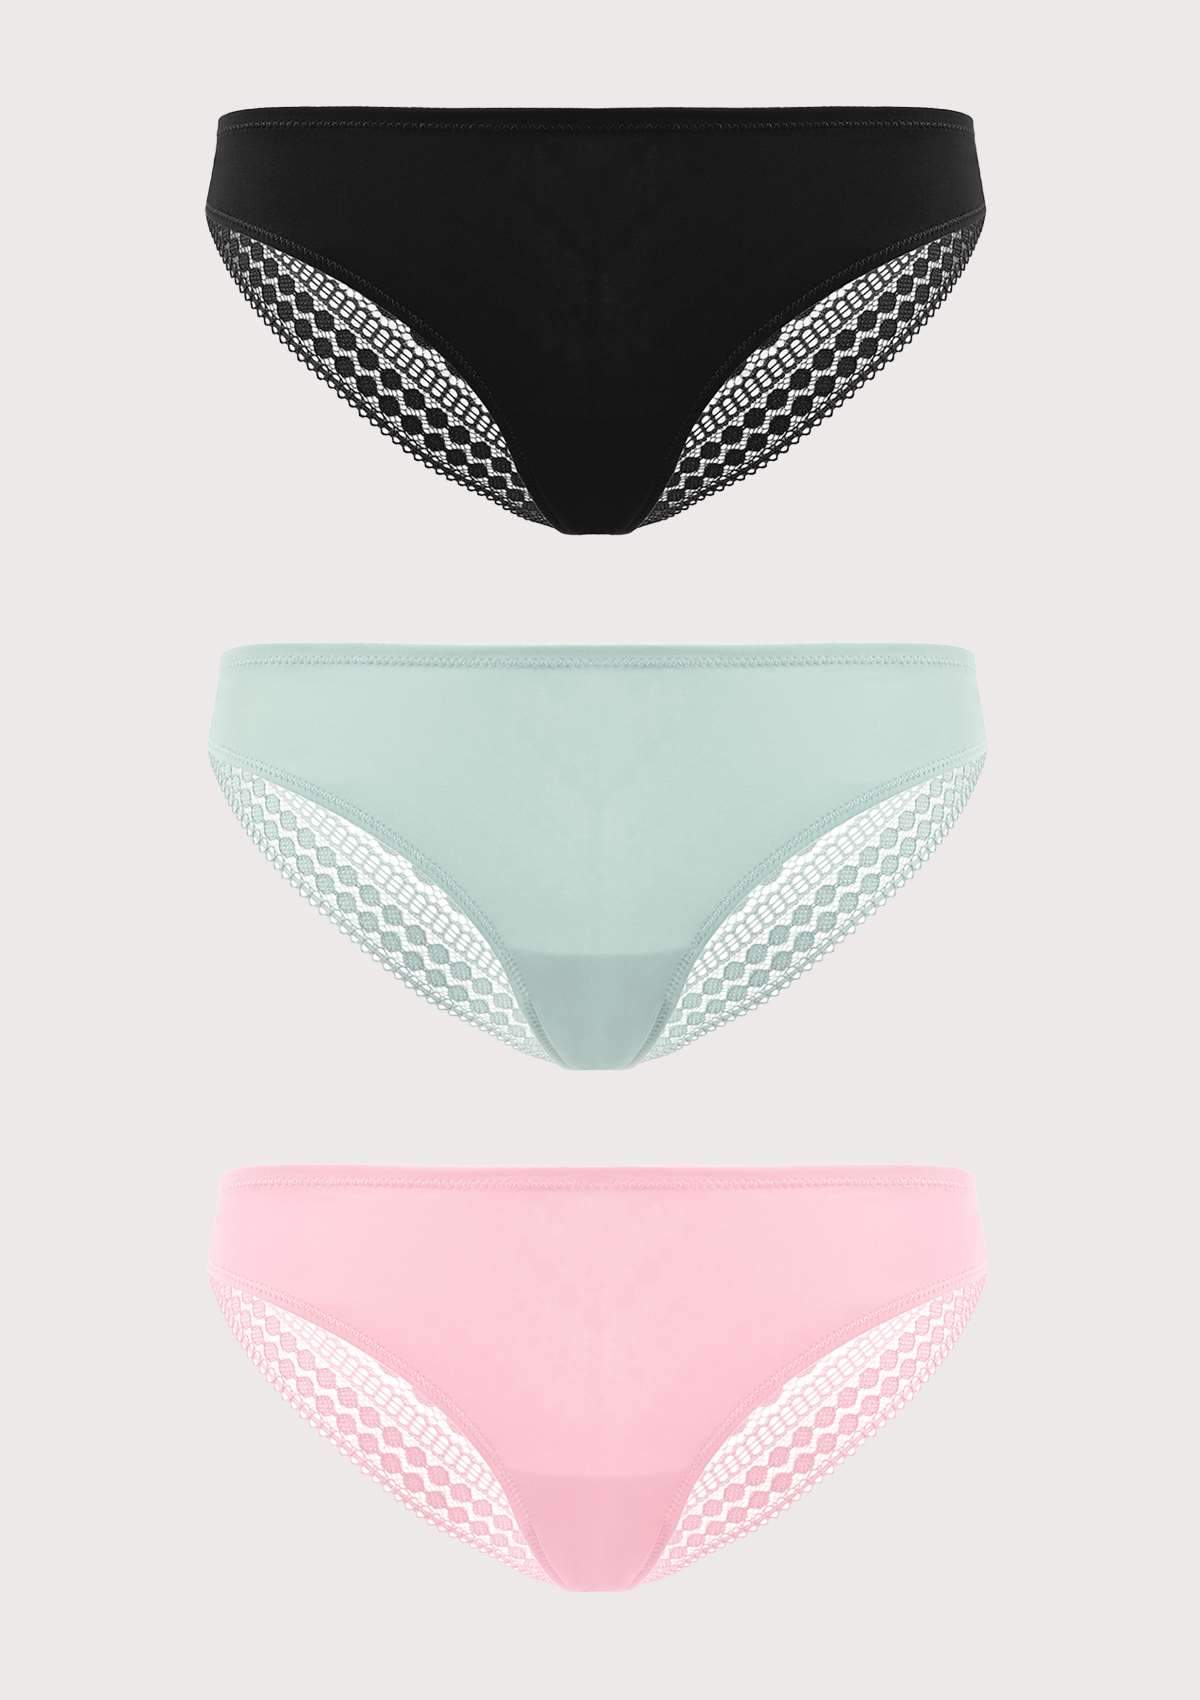 HSIA Polka Dot Super Soft Lace Back Cheeky Panties 3 Pack - M / Black+Rose Cloud+Brittany Blue